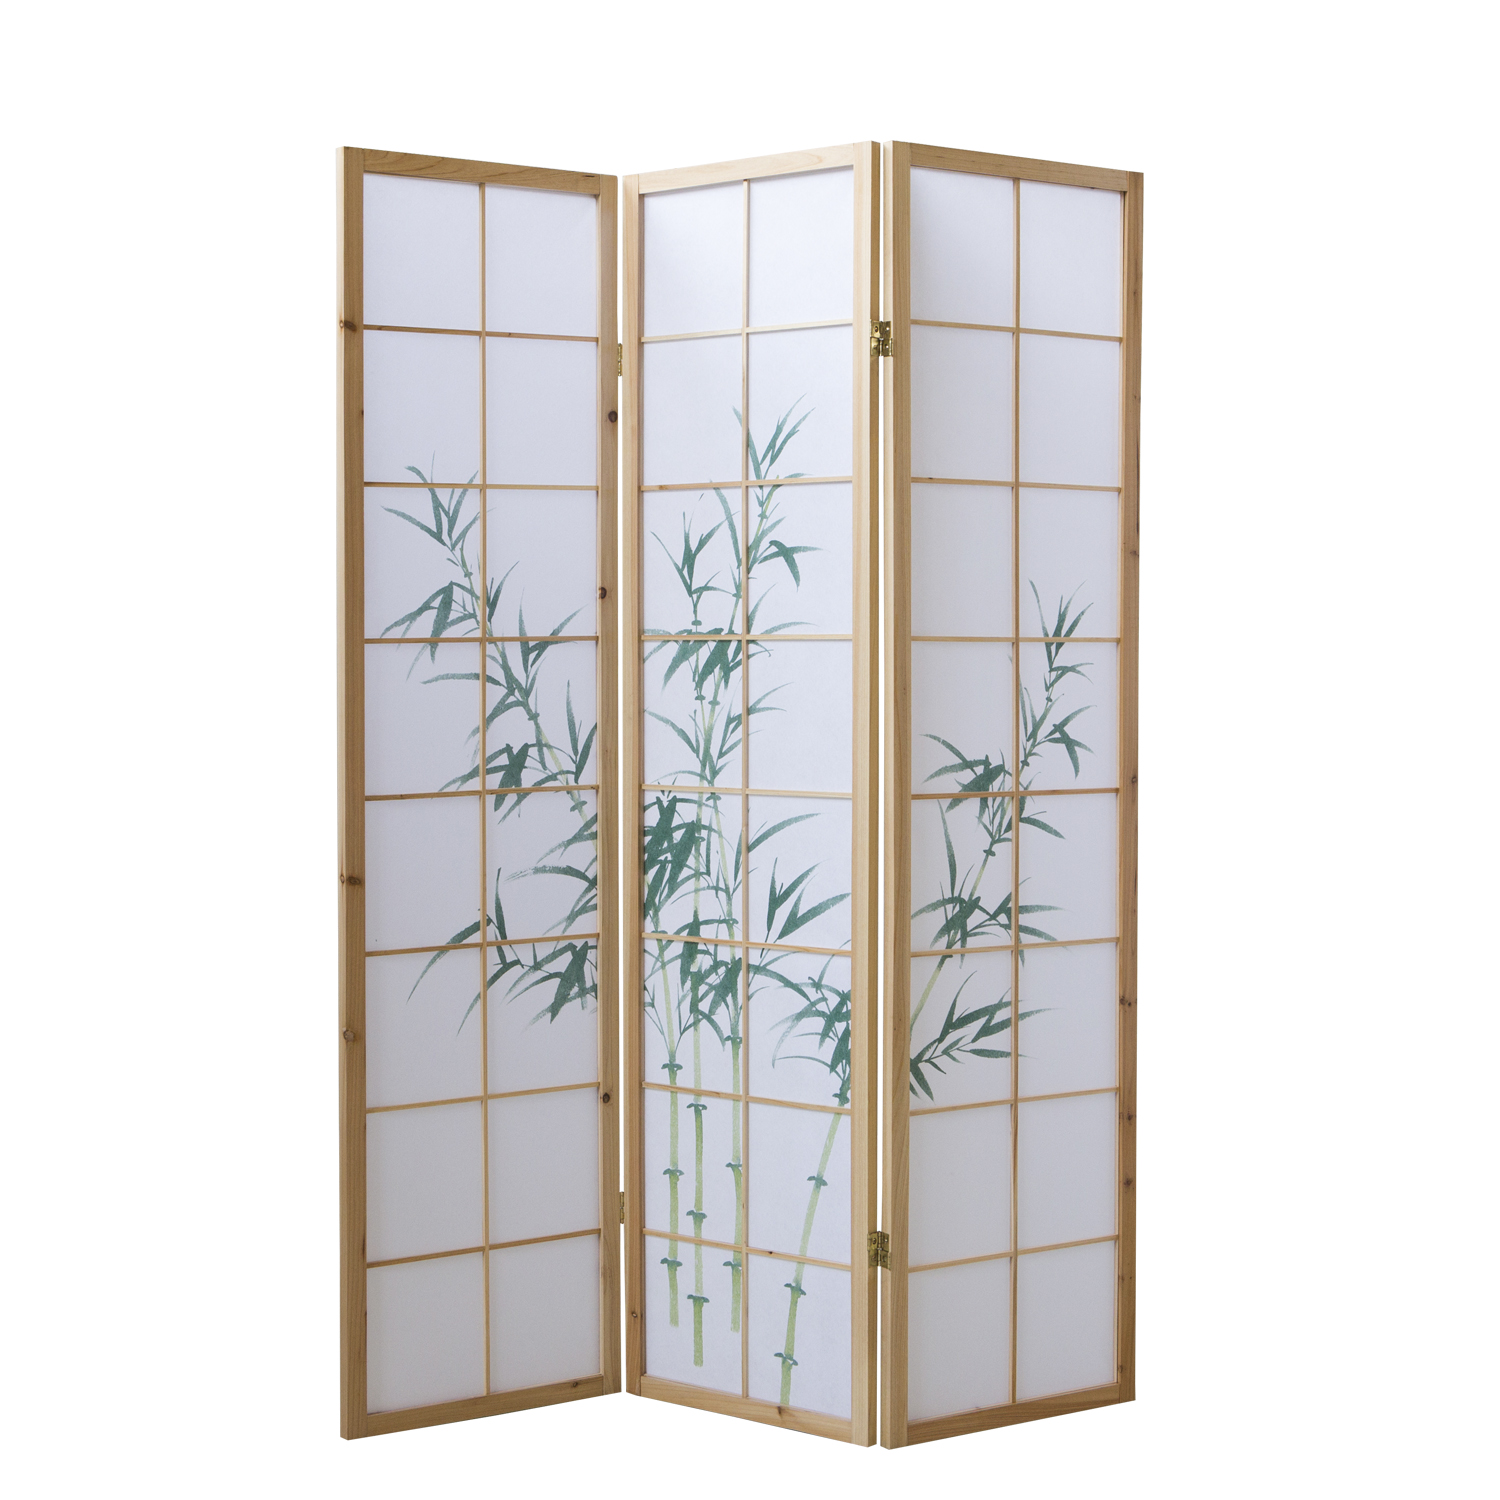 Paravent room divider 3 parts, wood natural, rice paper white, bamboo pattern, height 175 cm	